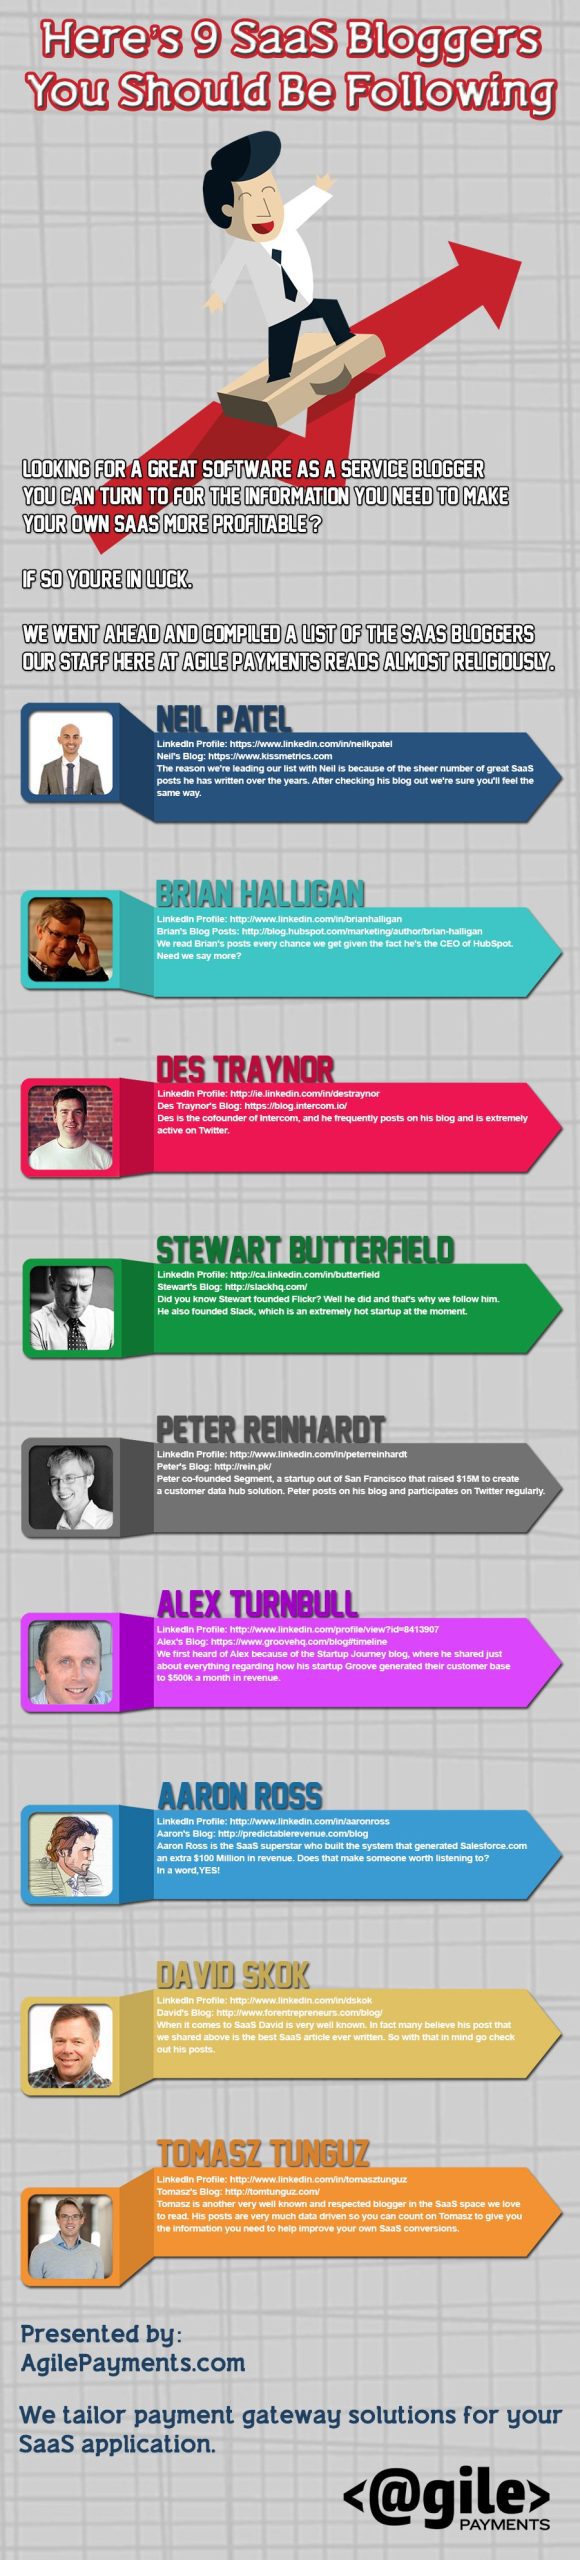 9 SaaS Bloggers To Follow Infographic